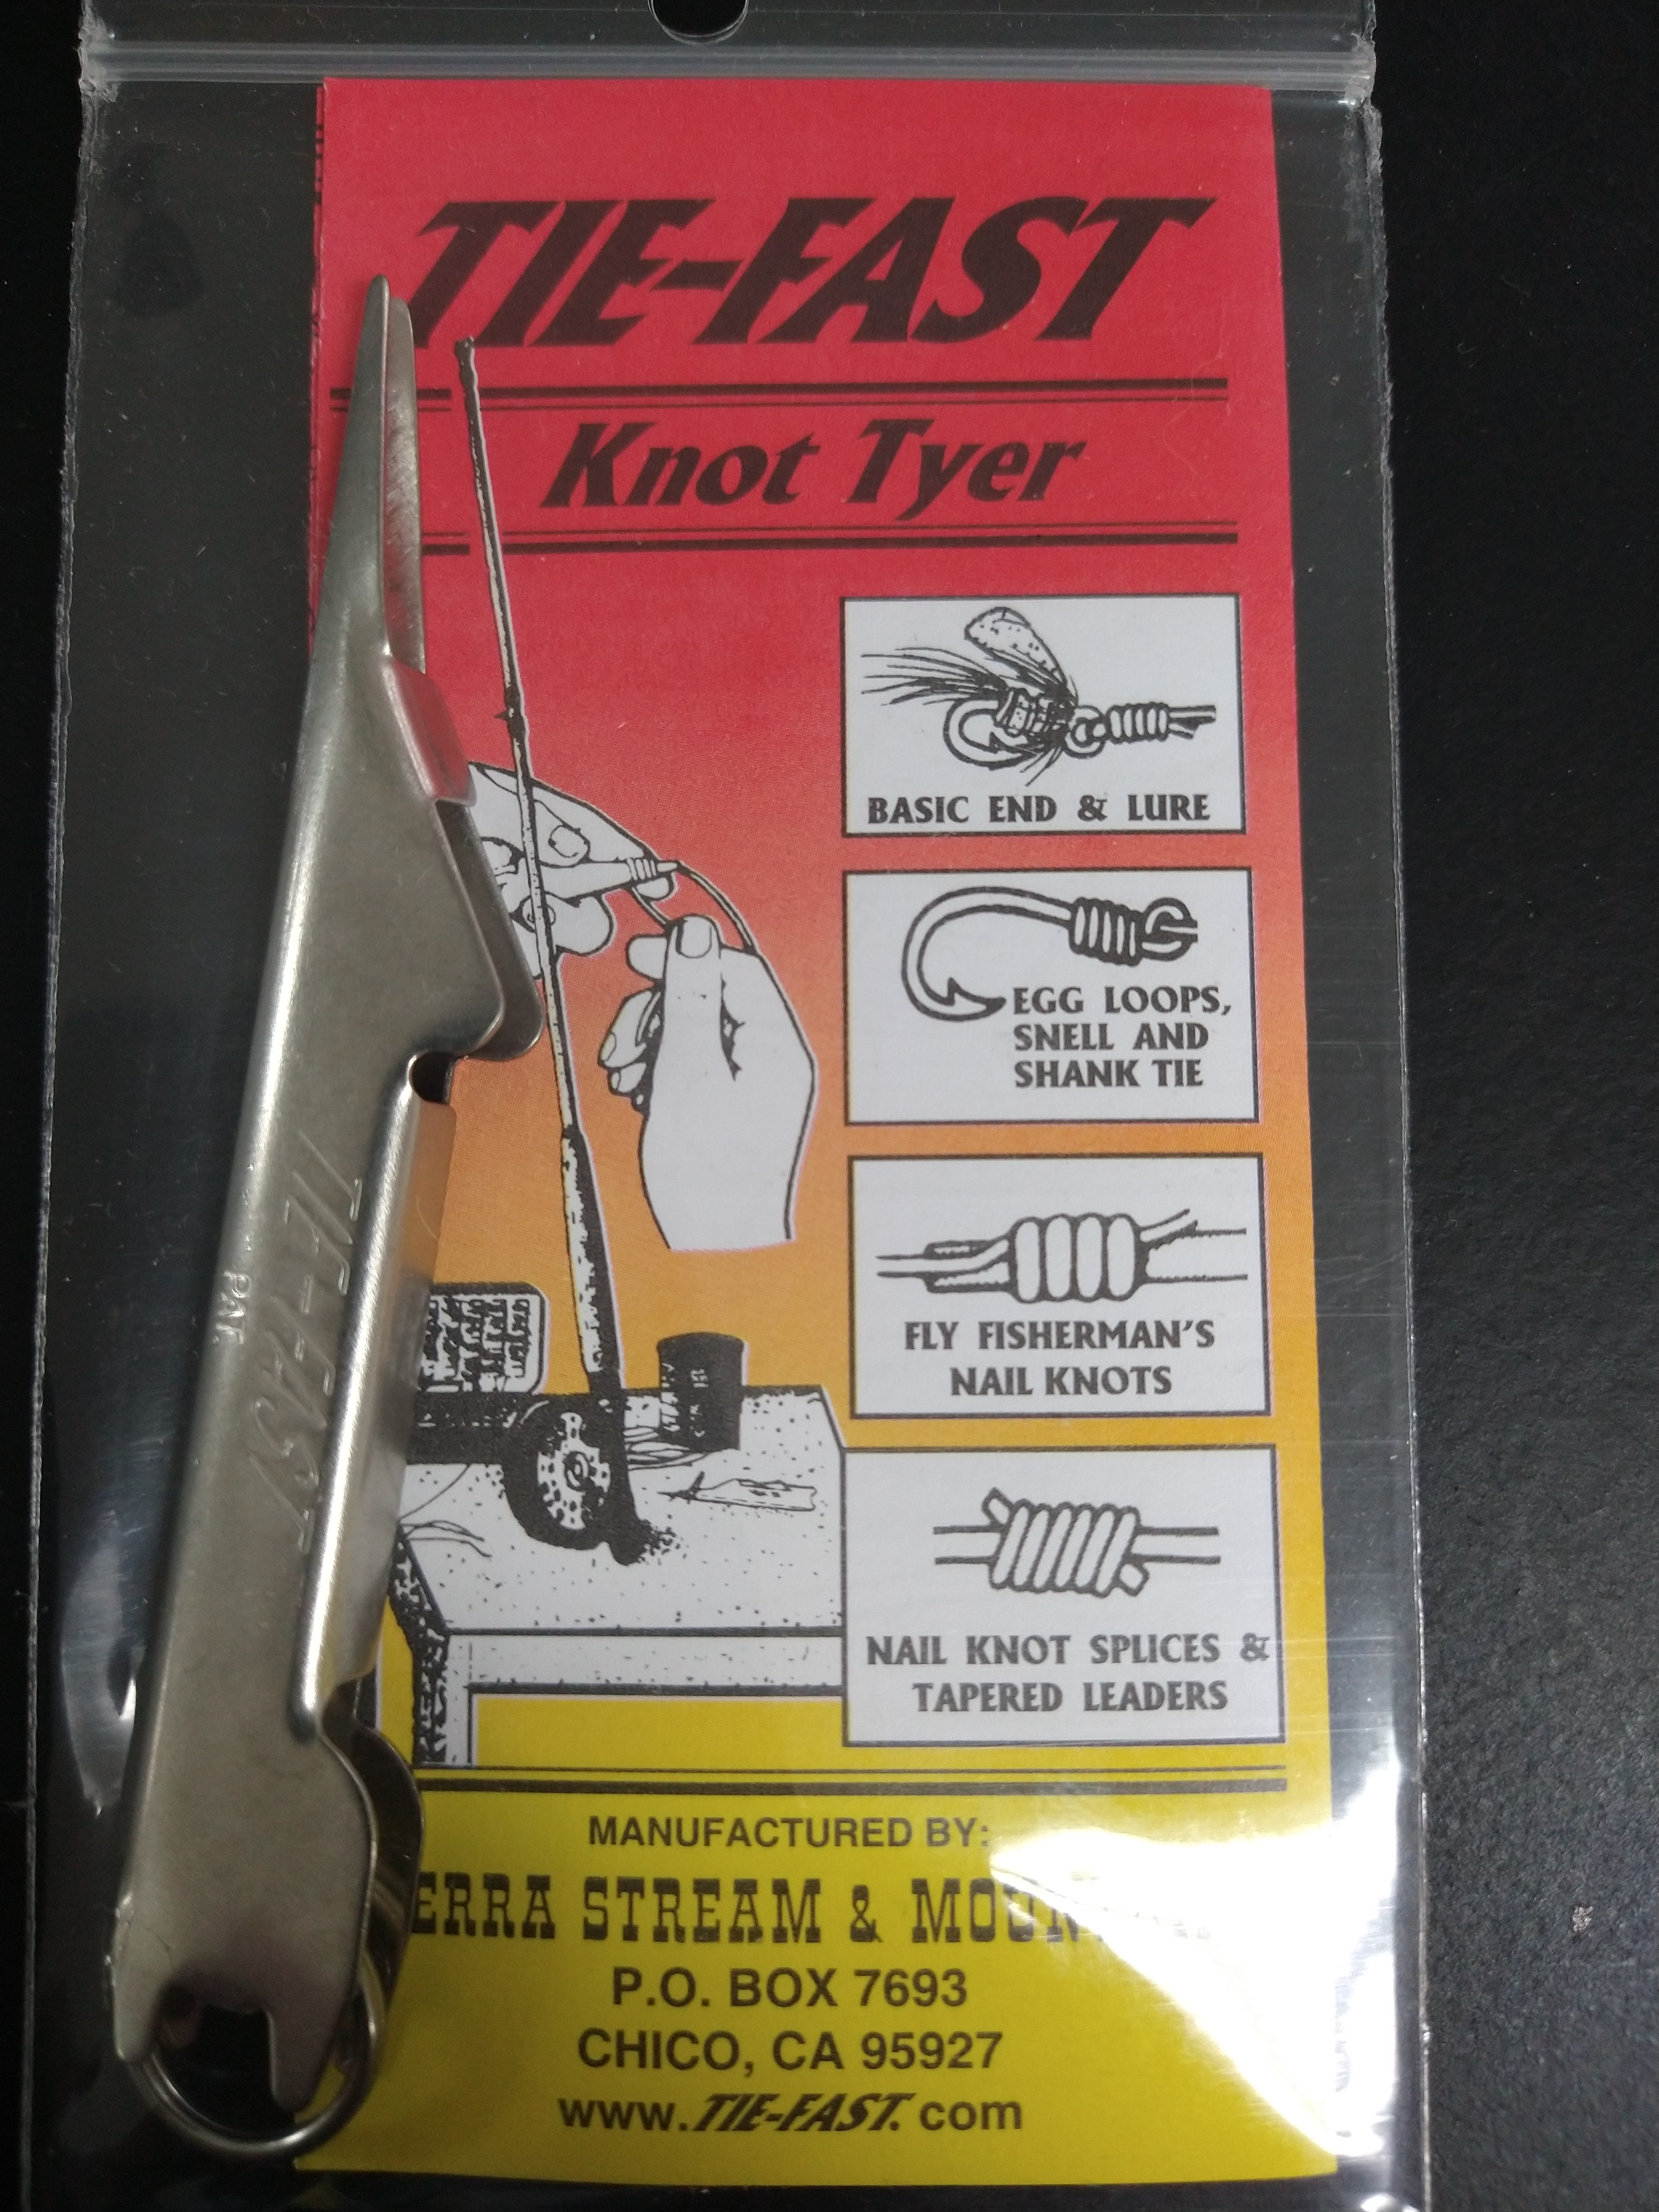 How To Use a Tie Fast Nail Knot Tool 